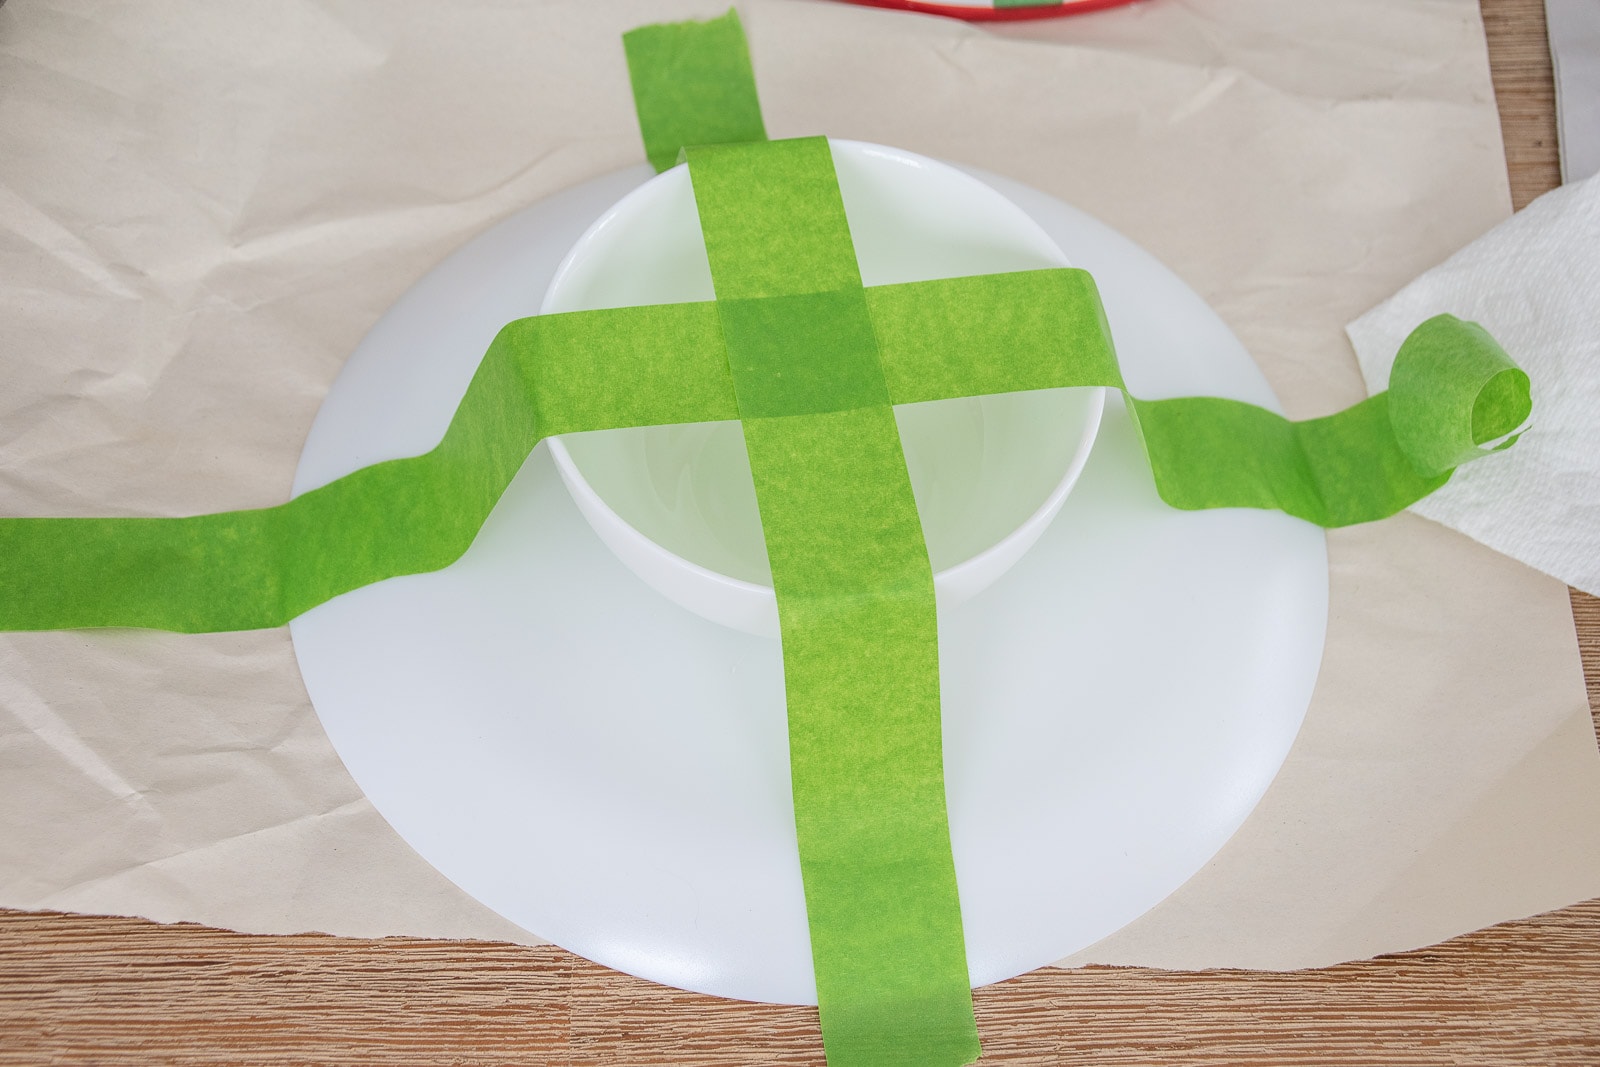 tape to hold dishes in place